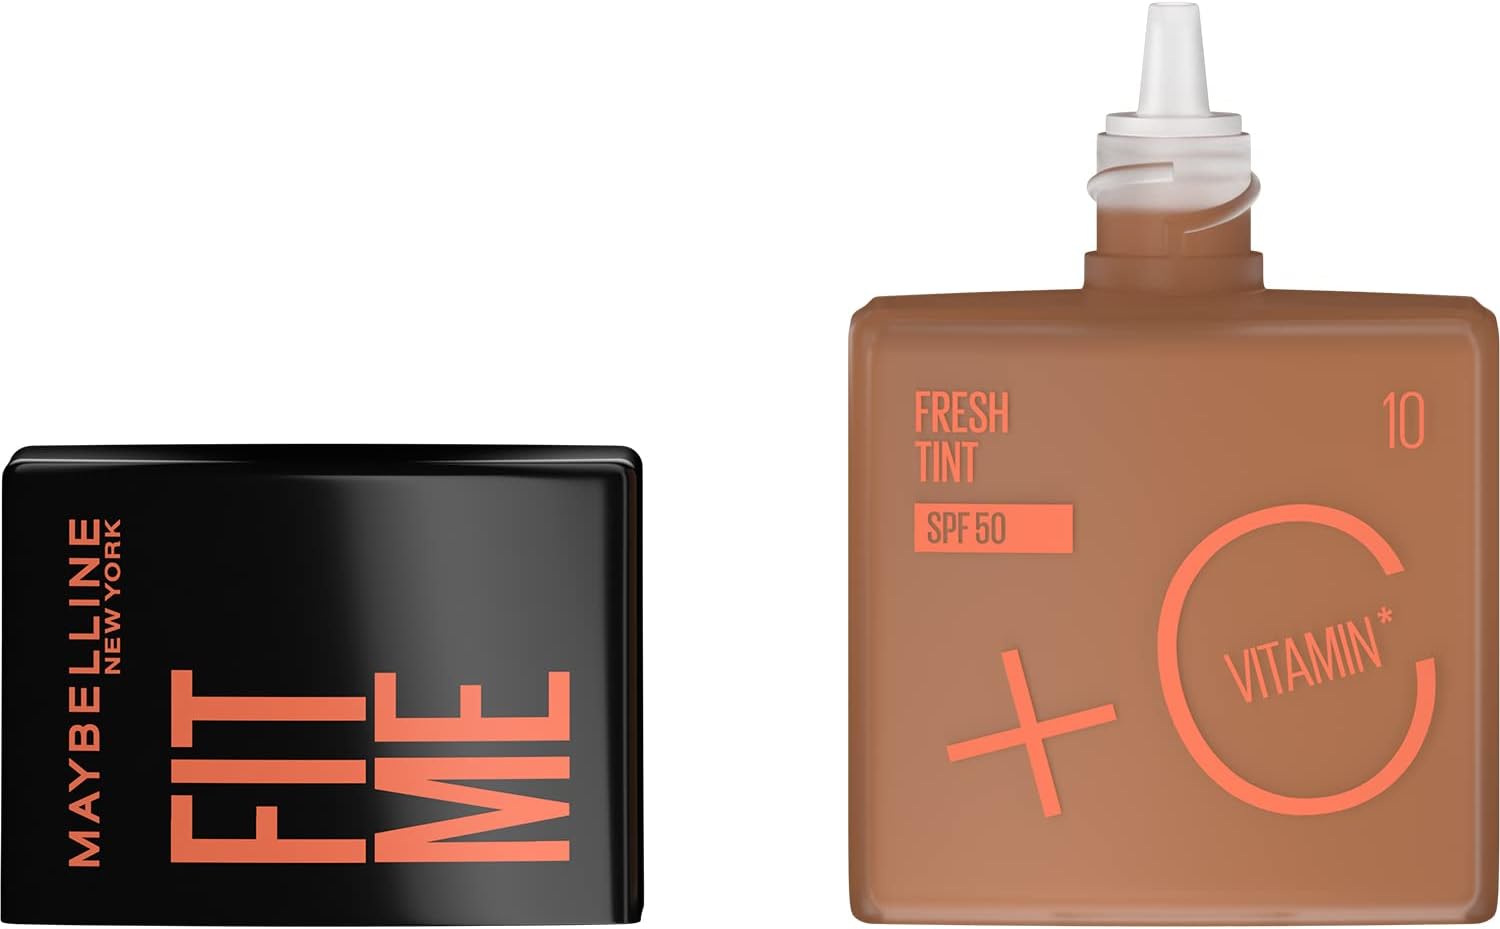 Maybelline New York, Fit Me Fresh Tint SPF 50 with Brightening Vitamin C